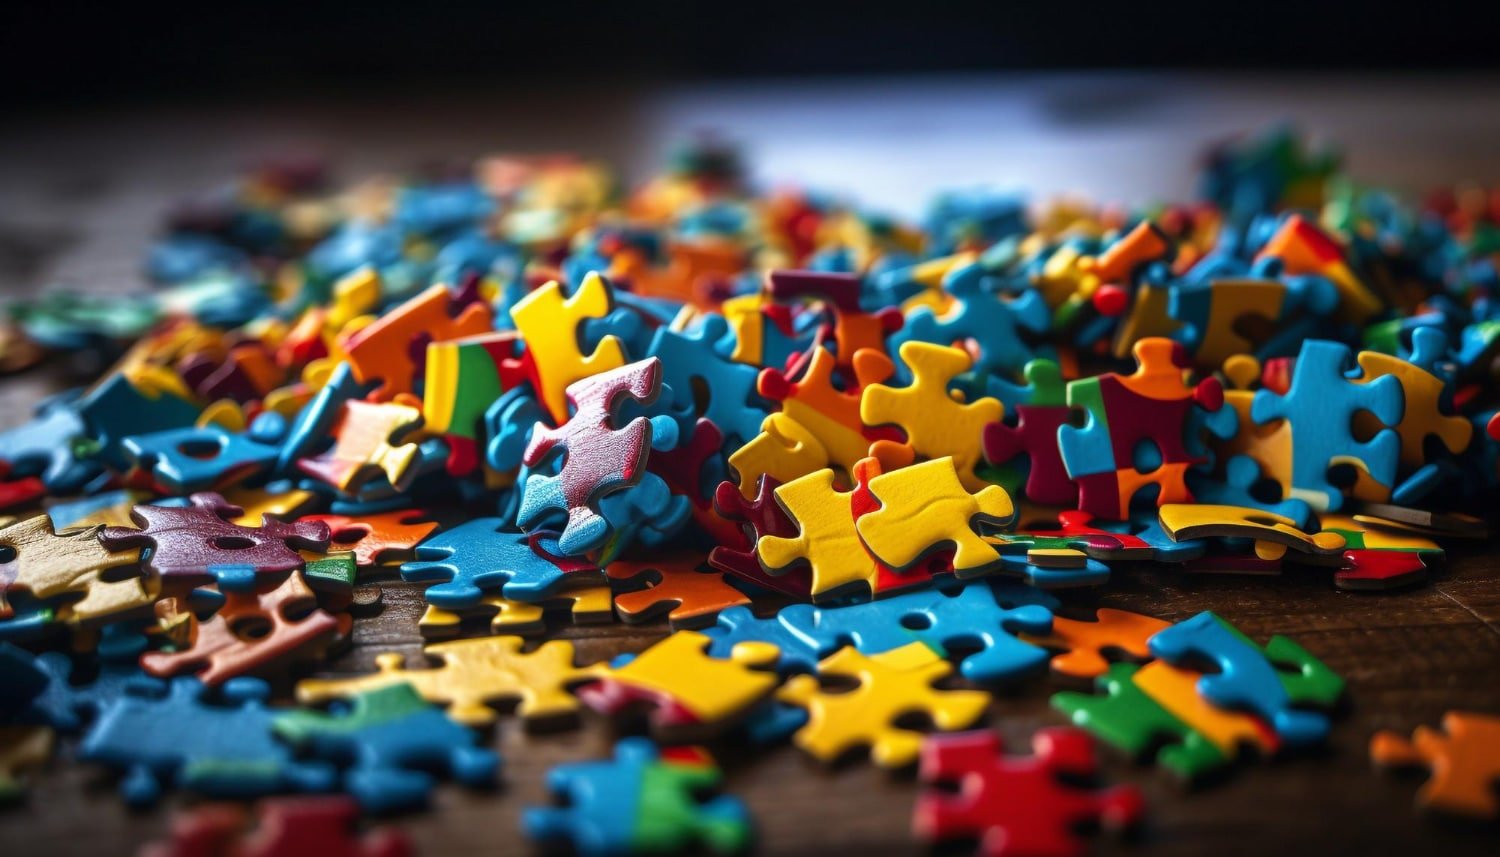 Challenge Yourself With Fotopuzzle.De’s Custom Jigsaw Puzzles